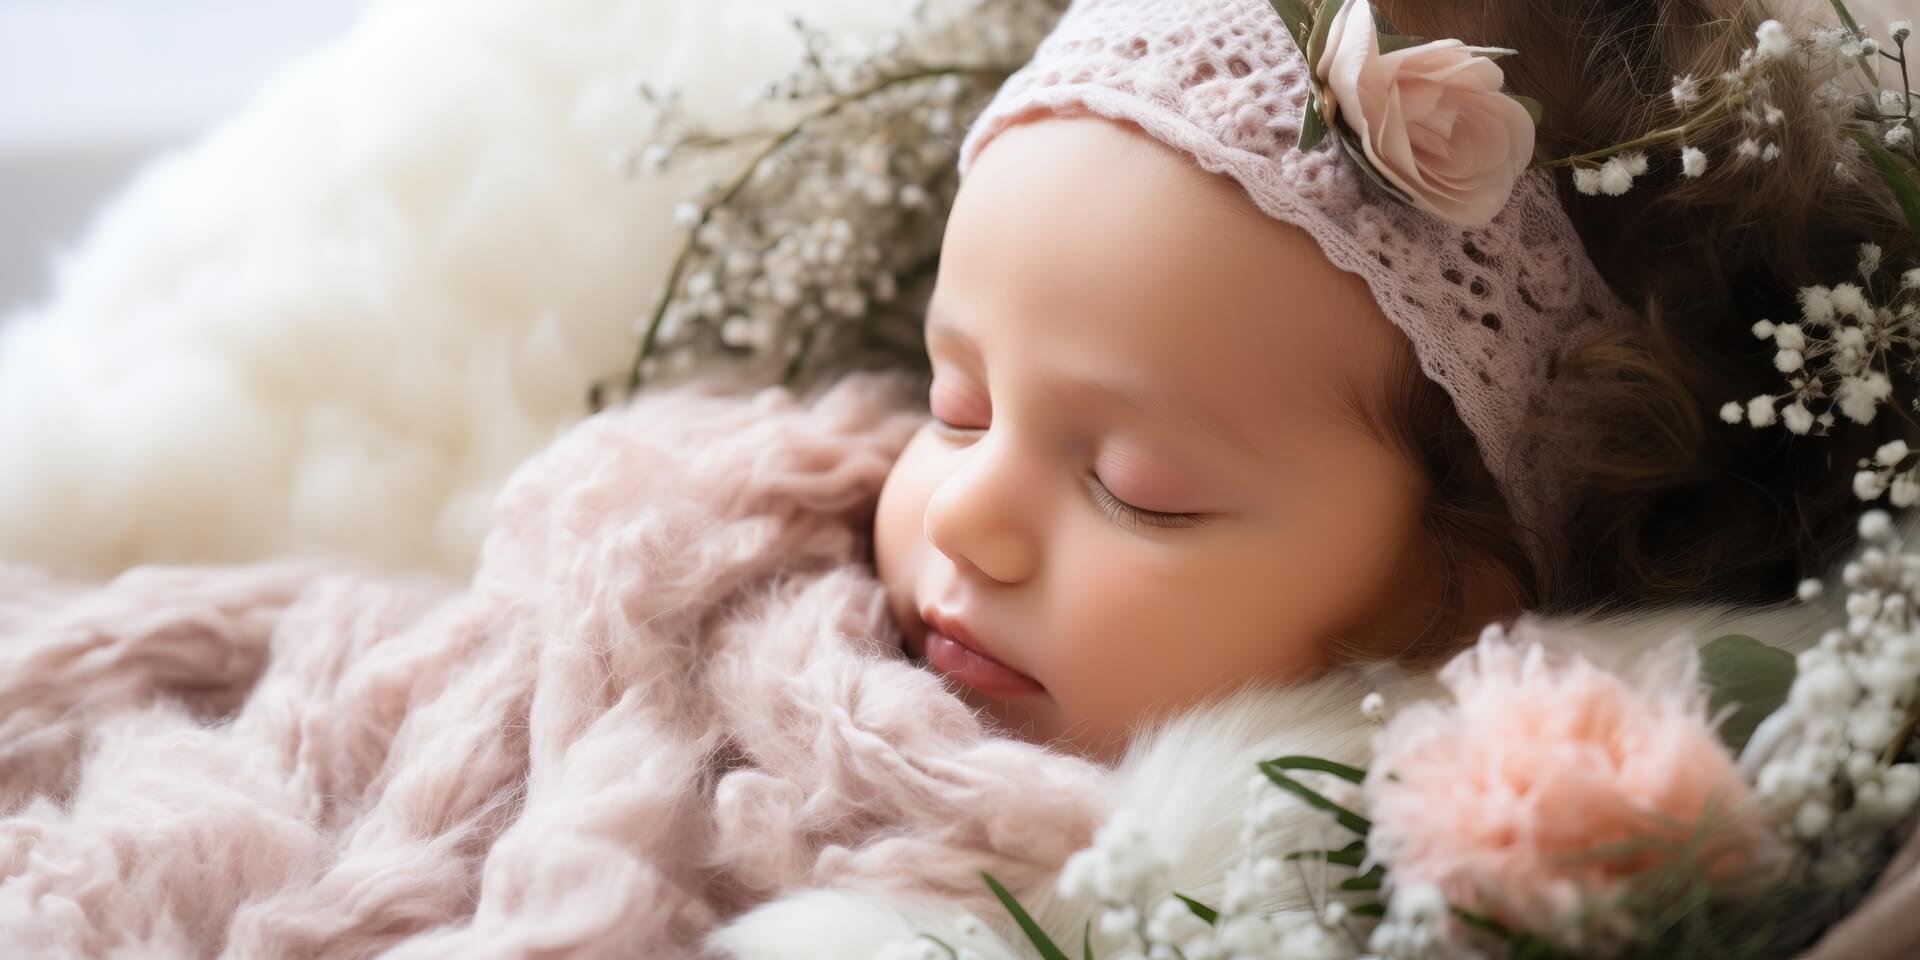 Here are some elegant baby girl names to add to your list!